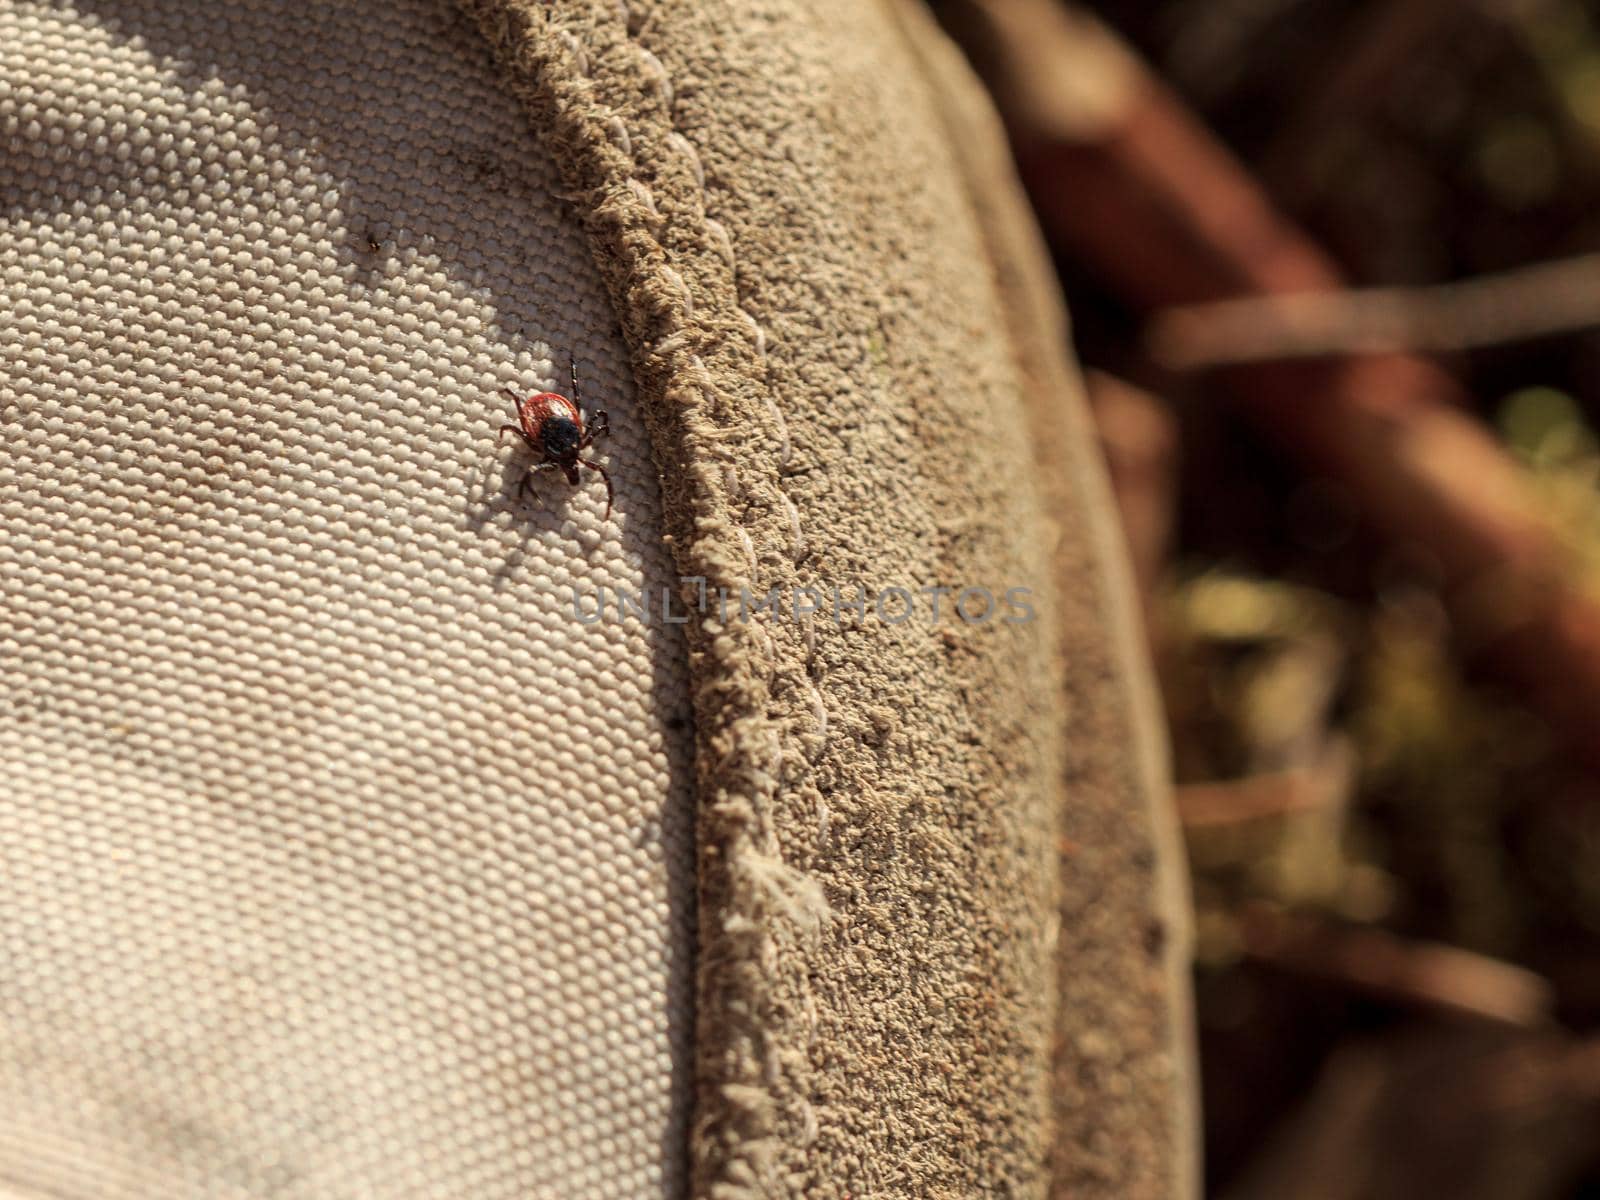 Red mite on white shoes in forest